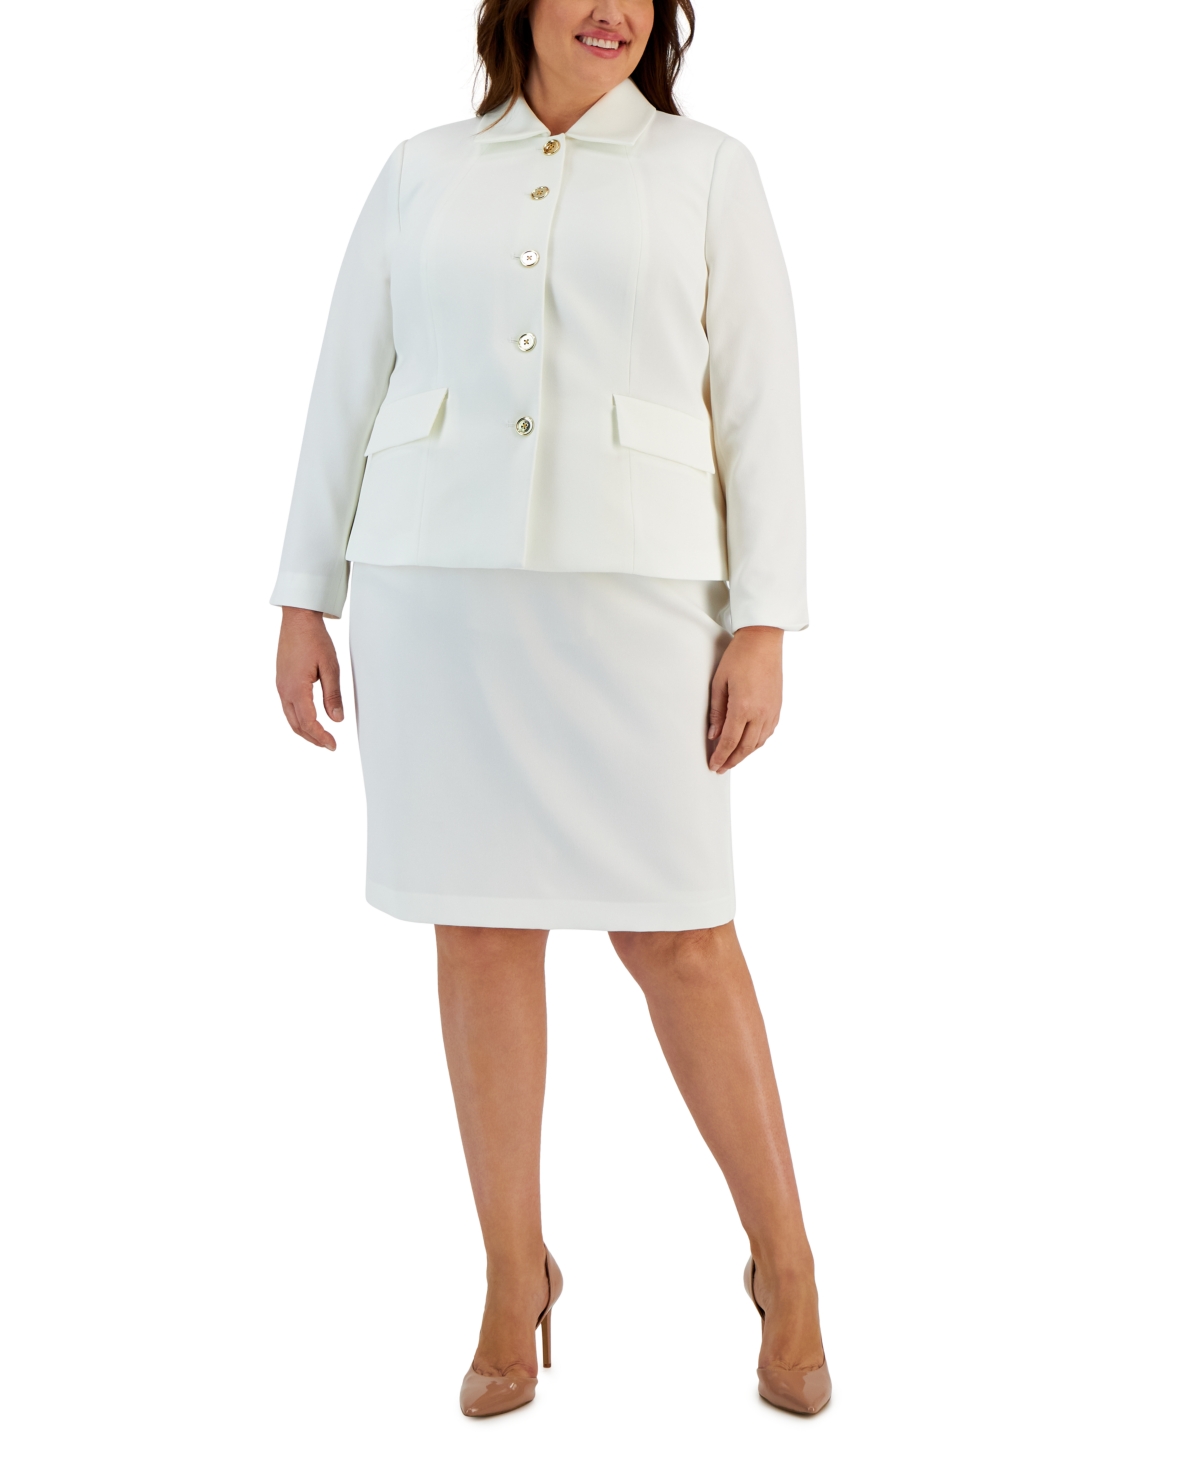 Le Suit Plus Size Crepe Wing-collar Jacket & Slim Skirt Suit In Vanilla Ice